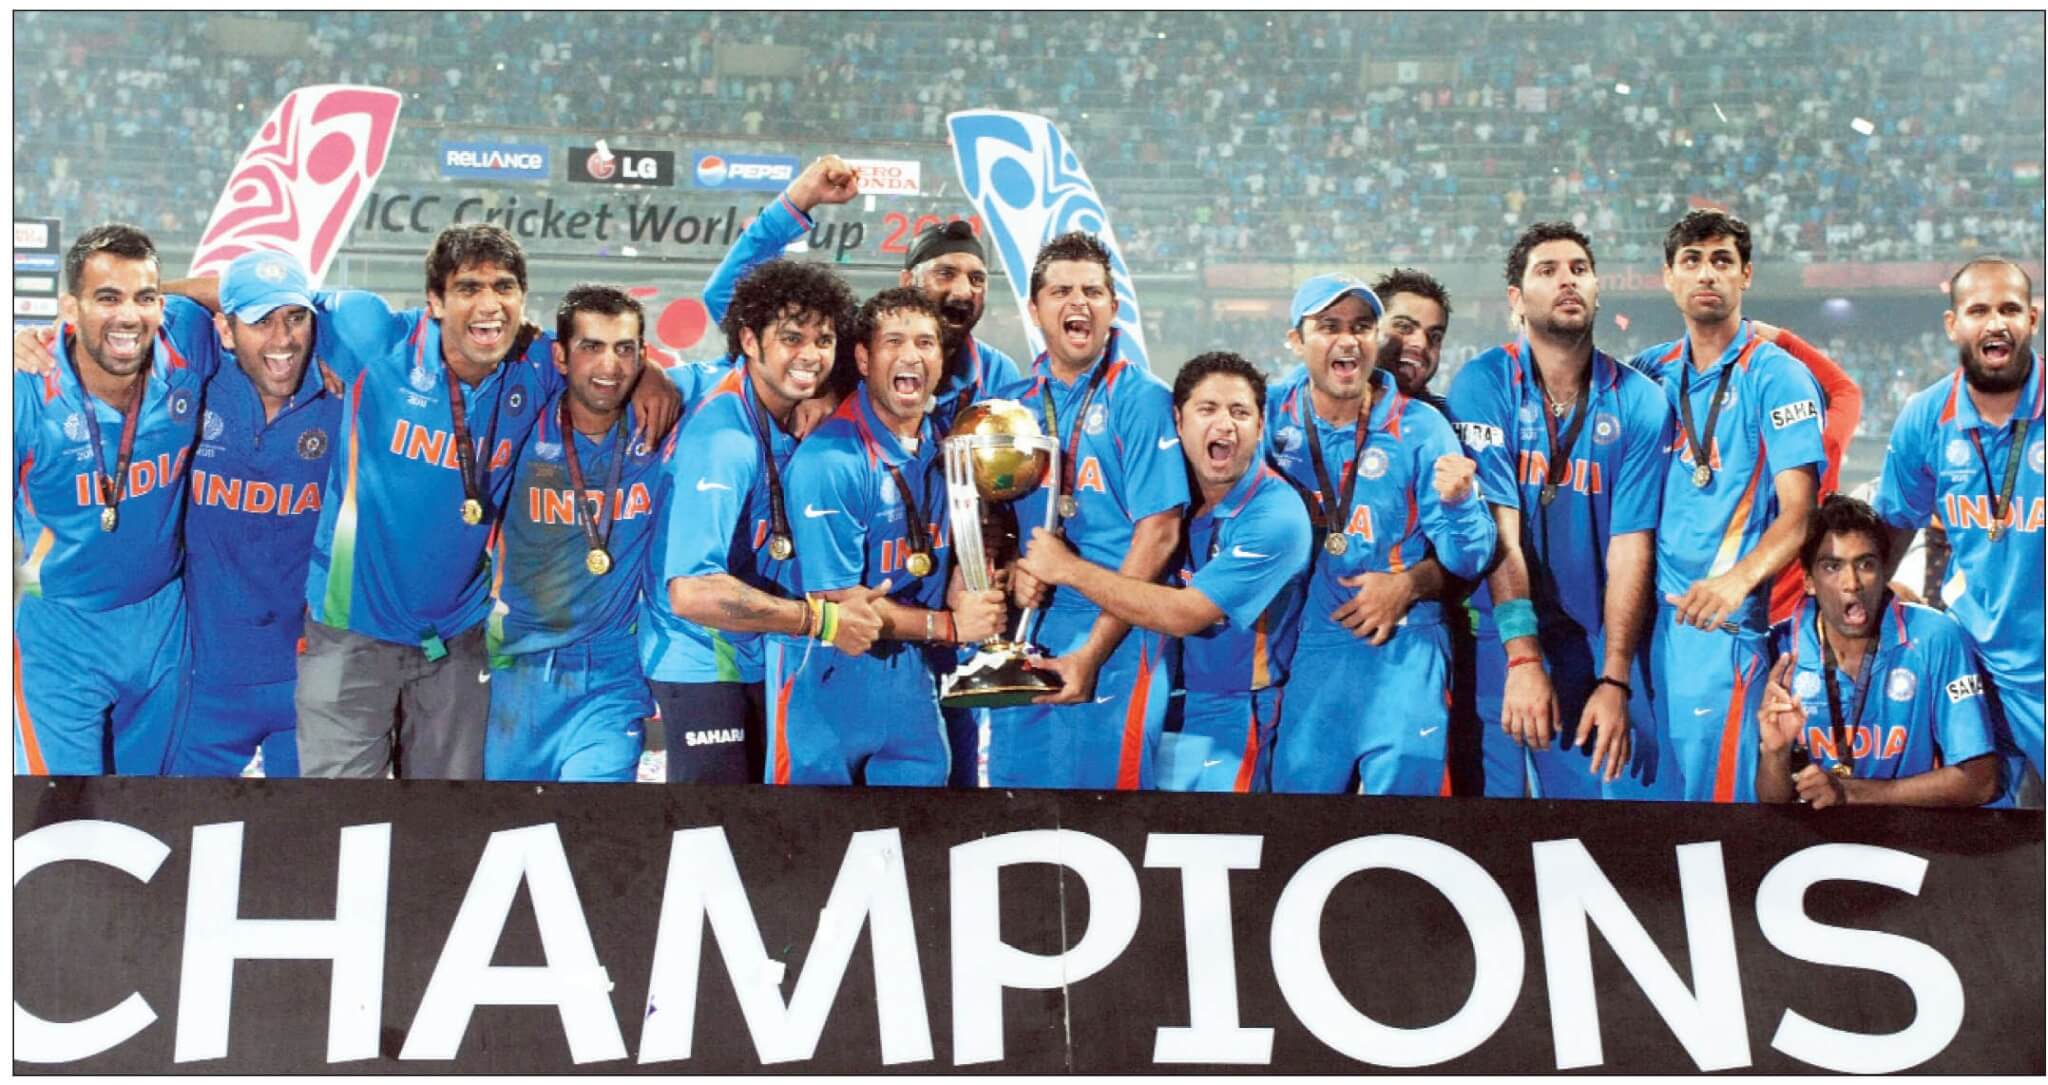 India to host World Cup in 2023 and Champions Trophy in 20212048 x 1085